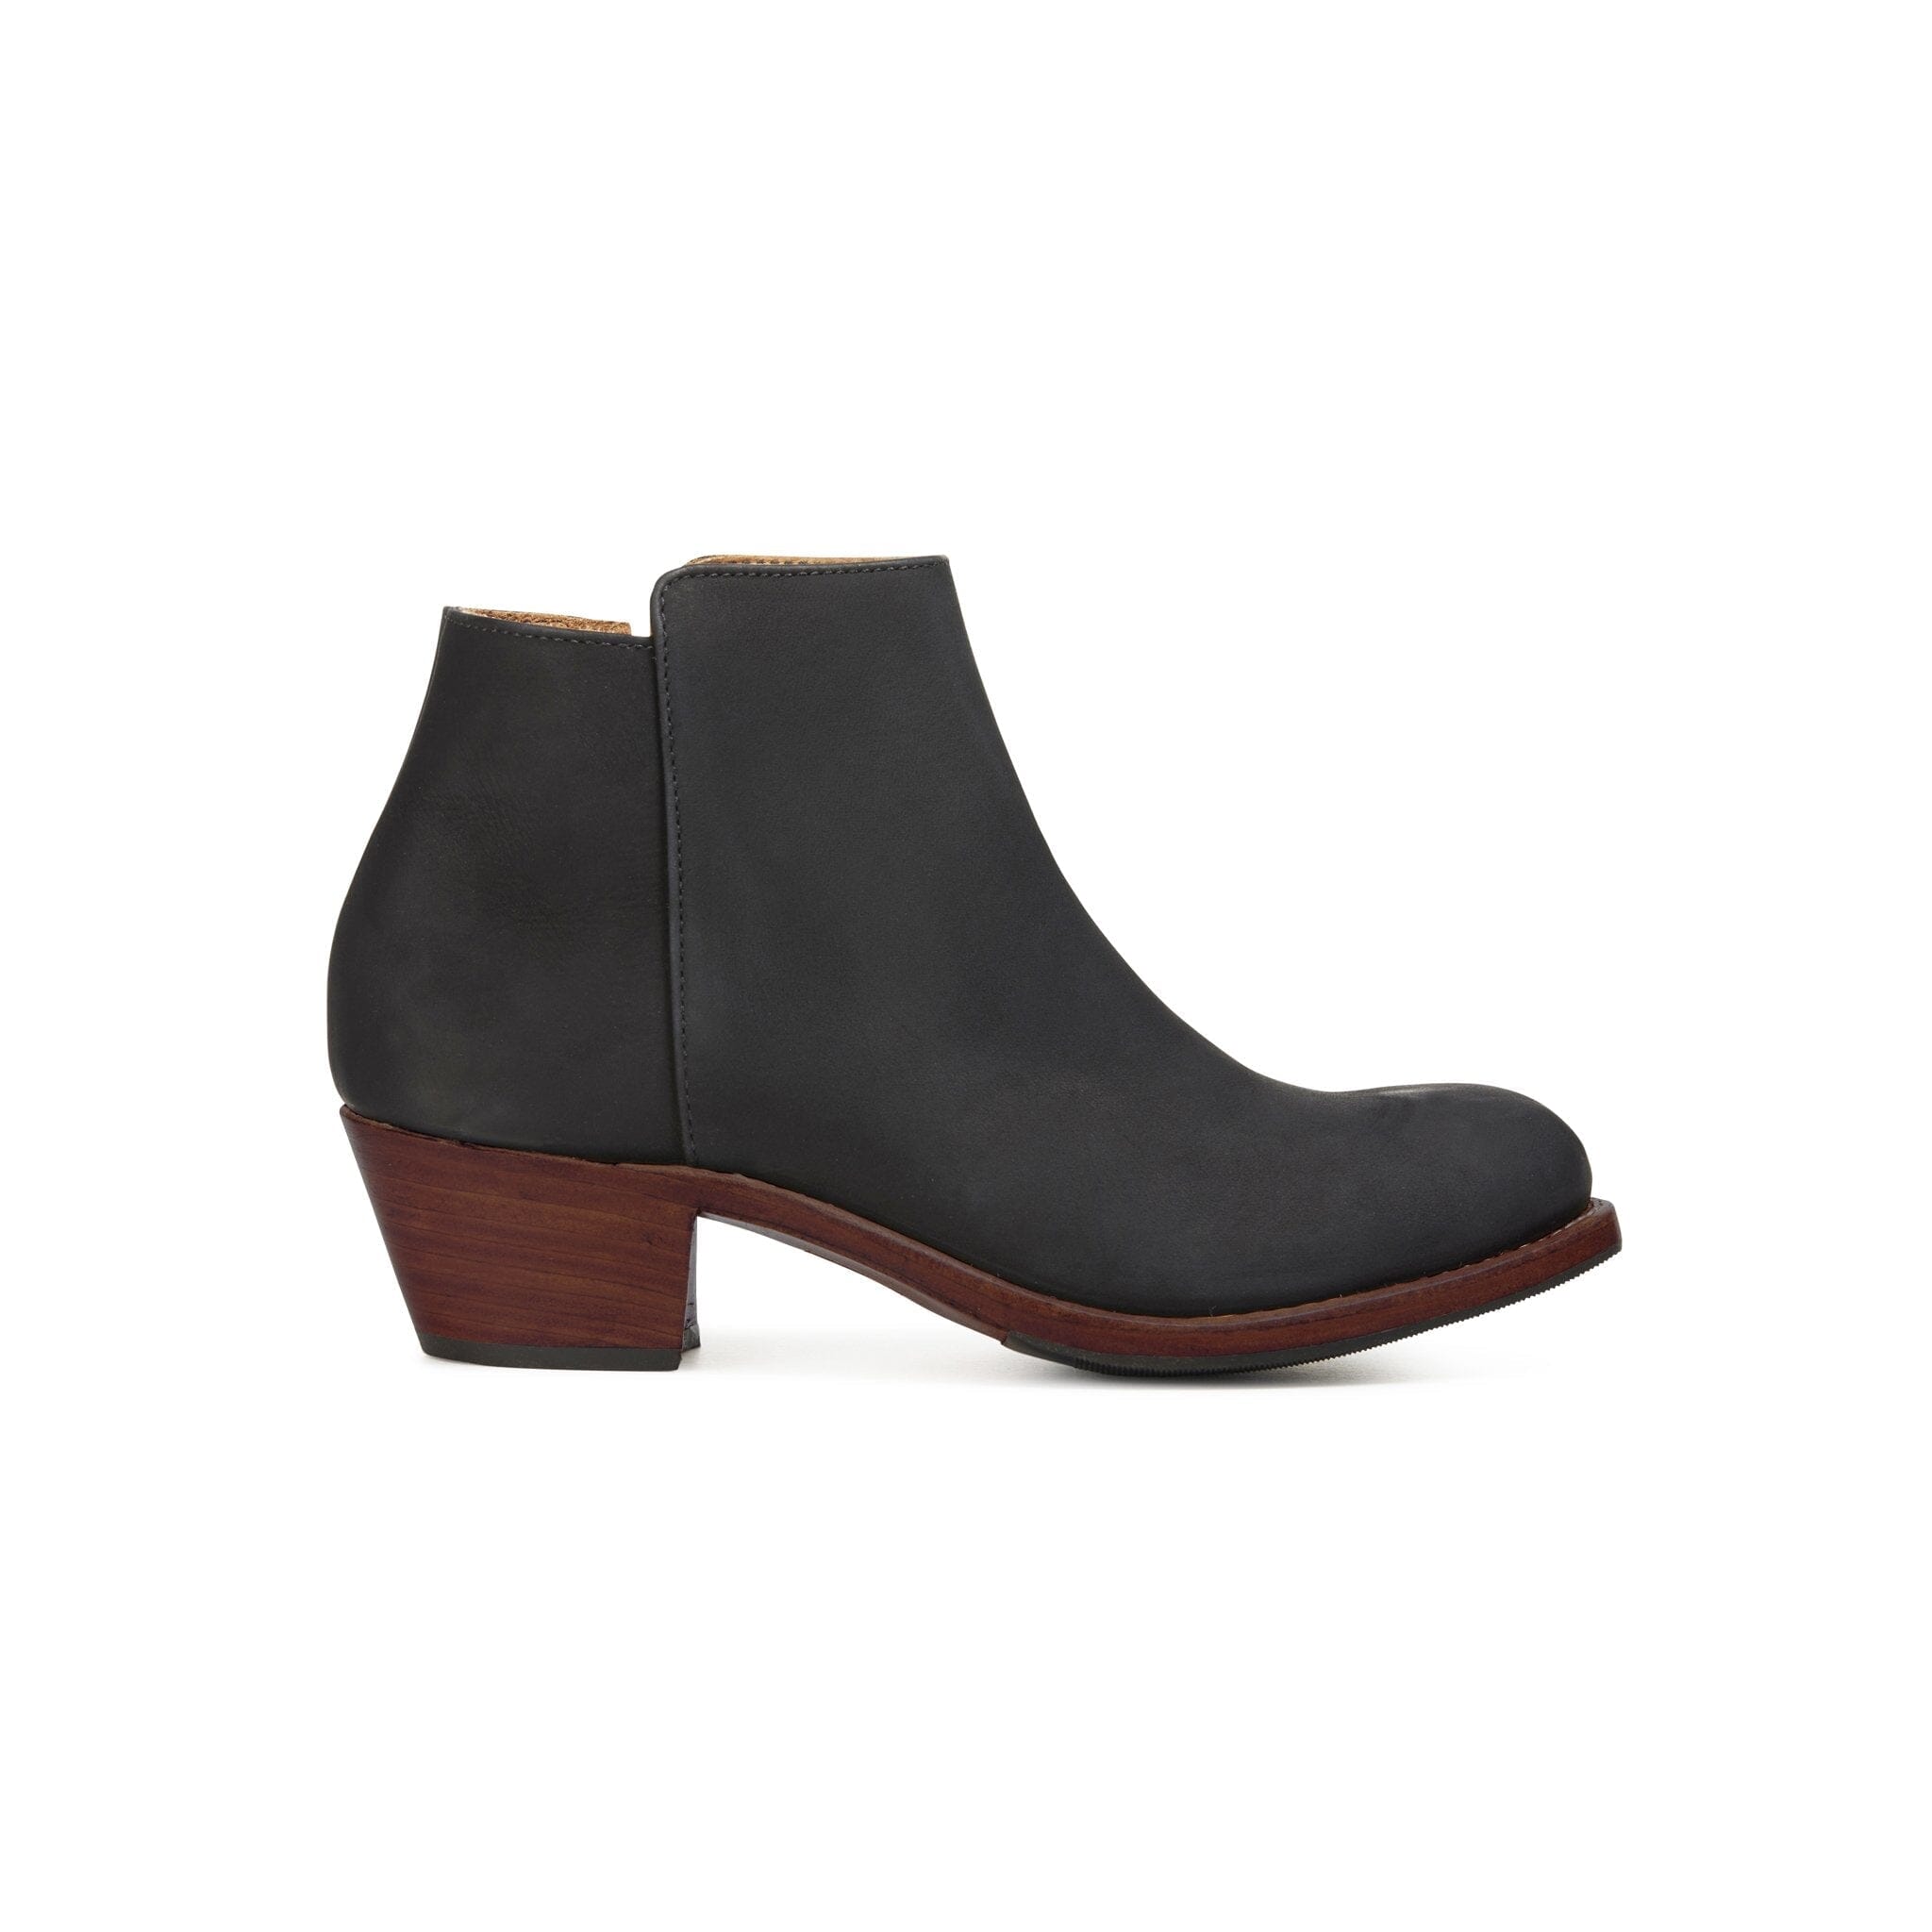 Granada Heeled Leather Boots – Made Trade